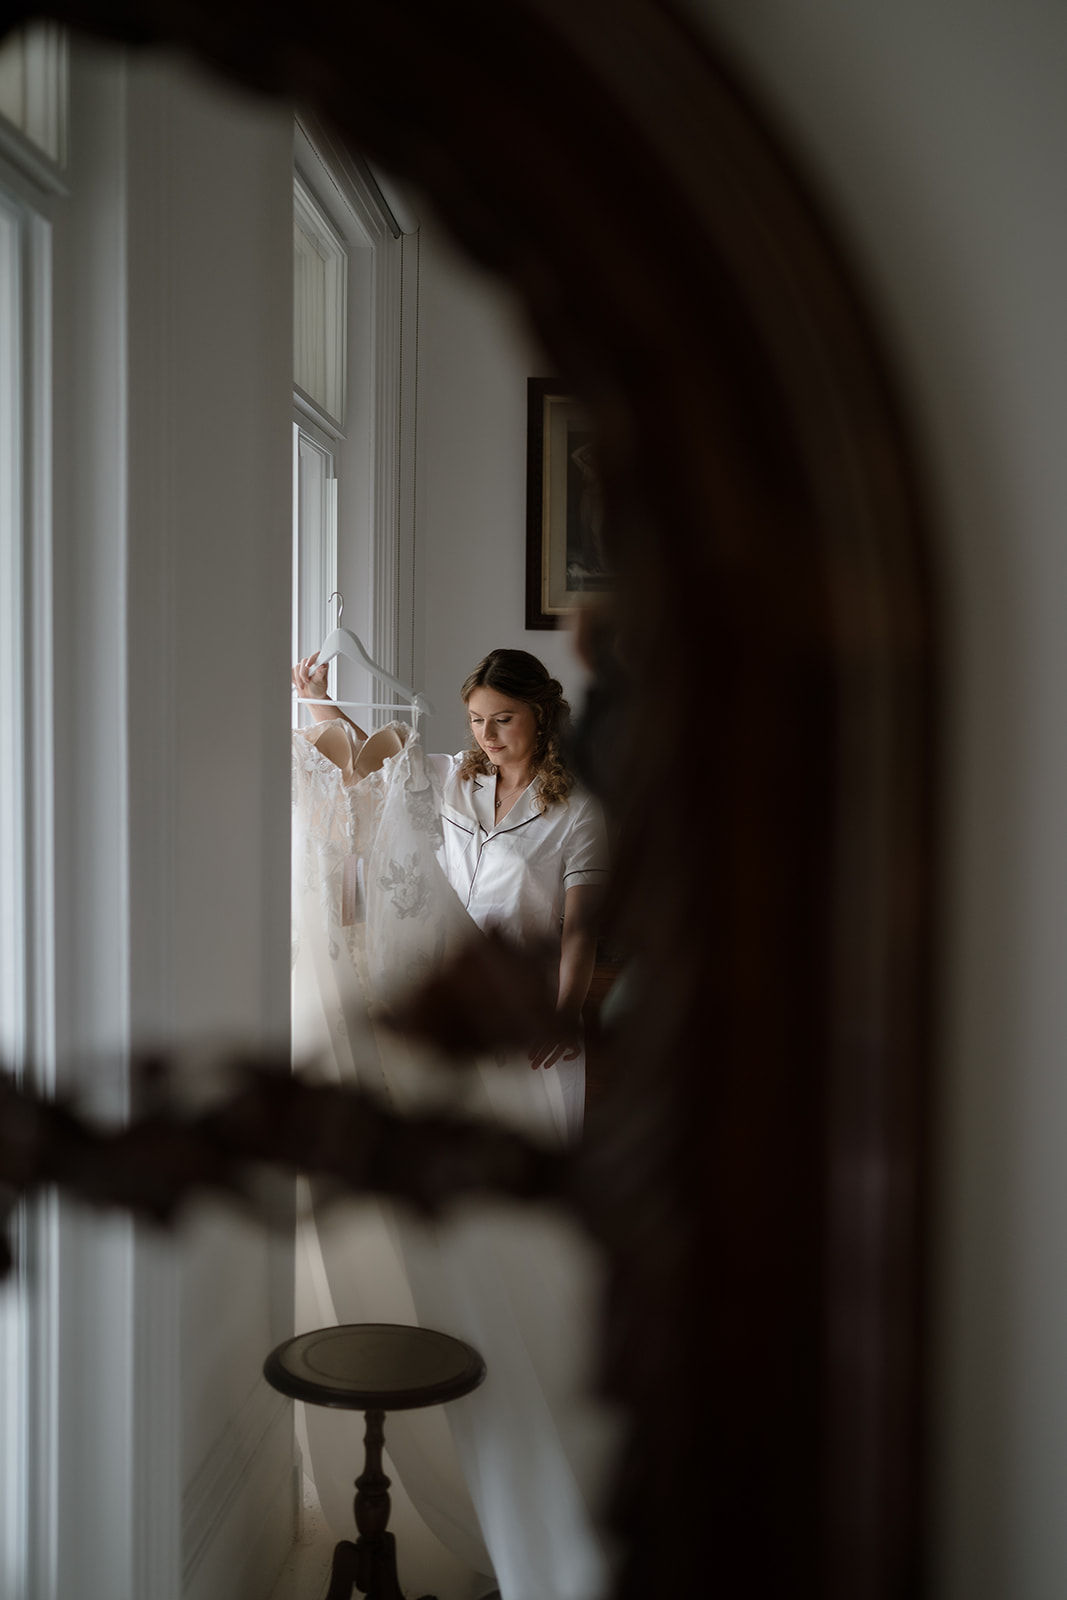 Intimate portrait of bride holding her dress, reflected in mirror, capturing the emotional build-up to her 